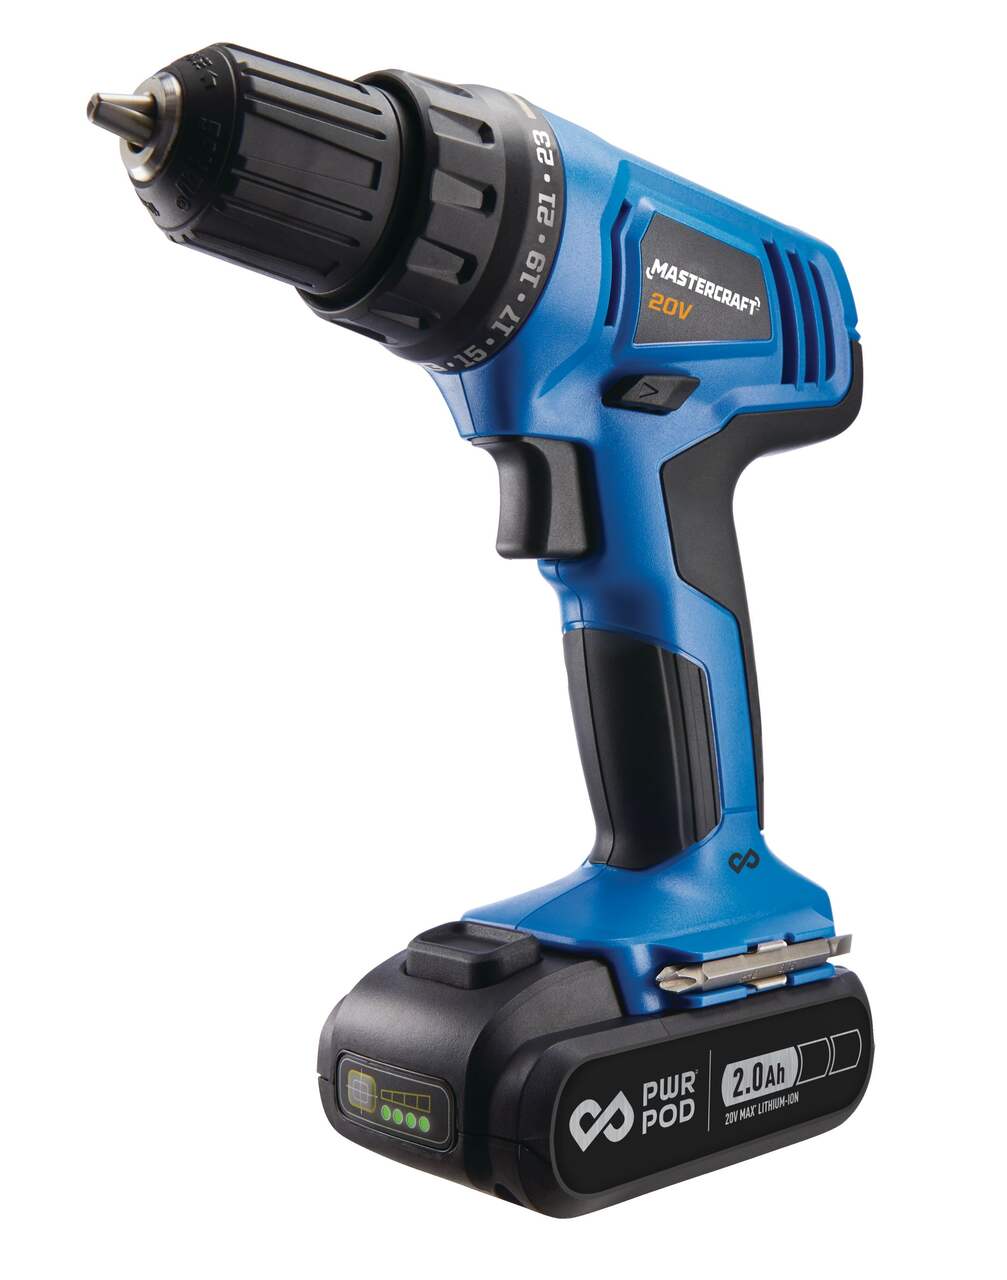 https://media-www.canadiantire.ca/product/fixing/tools/portable-power-tools/0541332/mastercraft-20v-1-speed-drill-5604728e-ef22-4f43-823a-3d21037baf6c-jpgrendition.jpg?imdensity=1&imwidth=1244&impolicy=mZoom